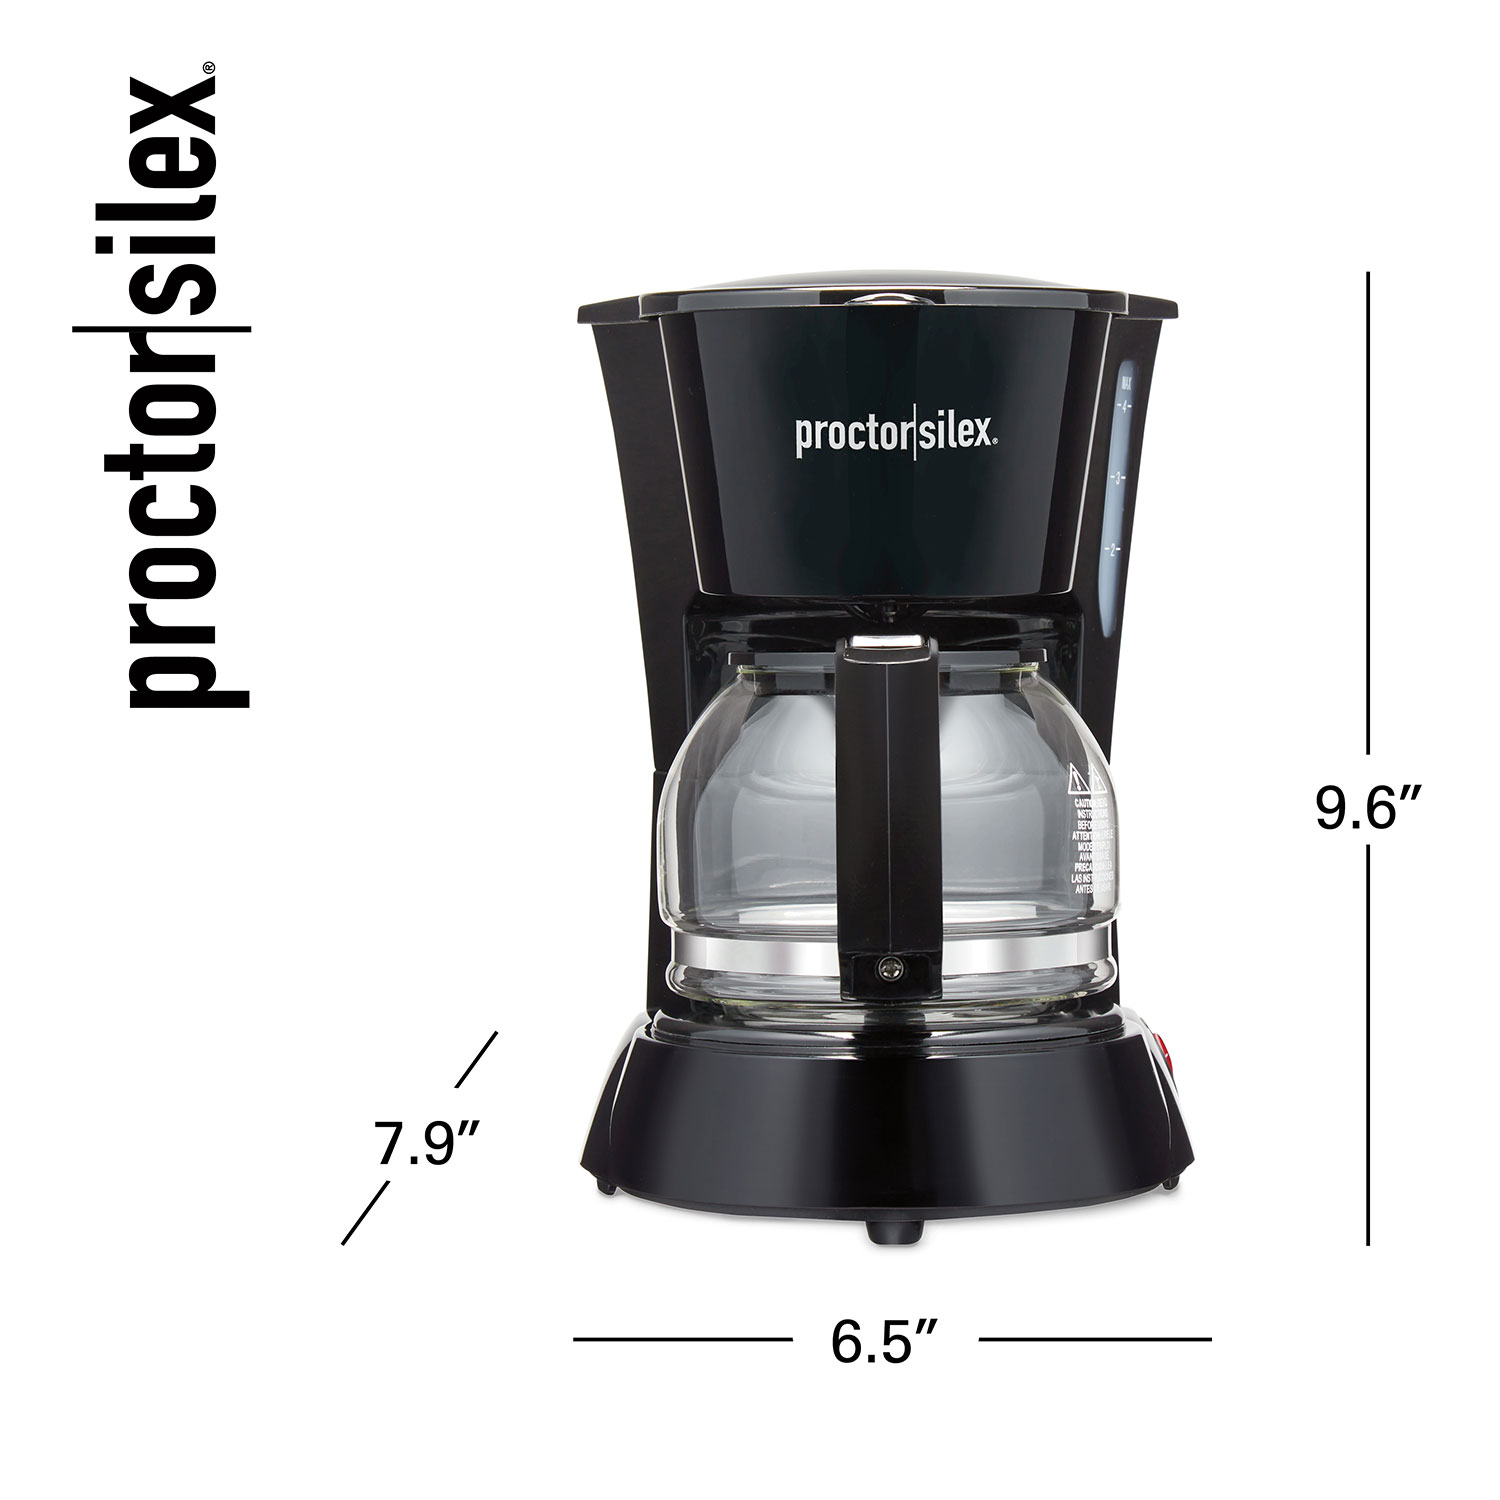 Proctor Silex Coffee Maker, Works with Smart Plugs That are Compatible